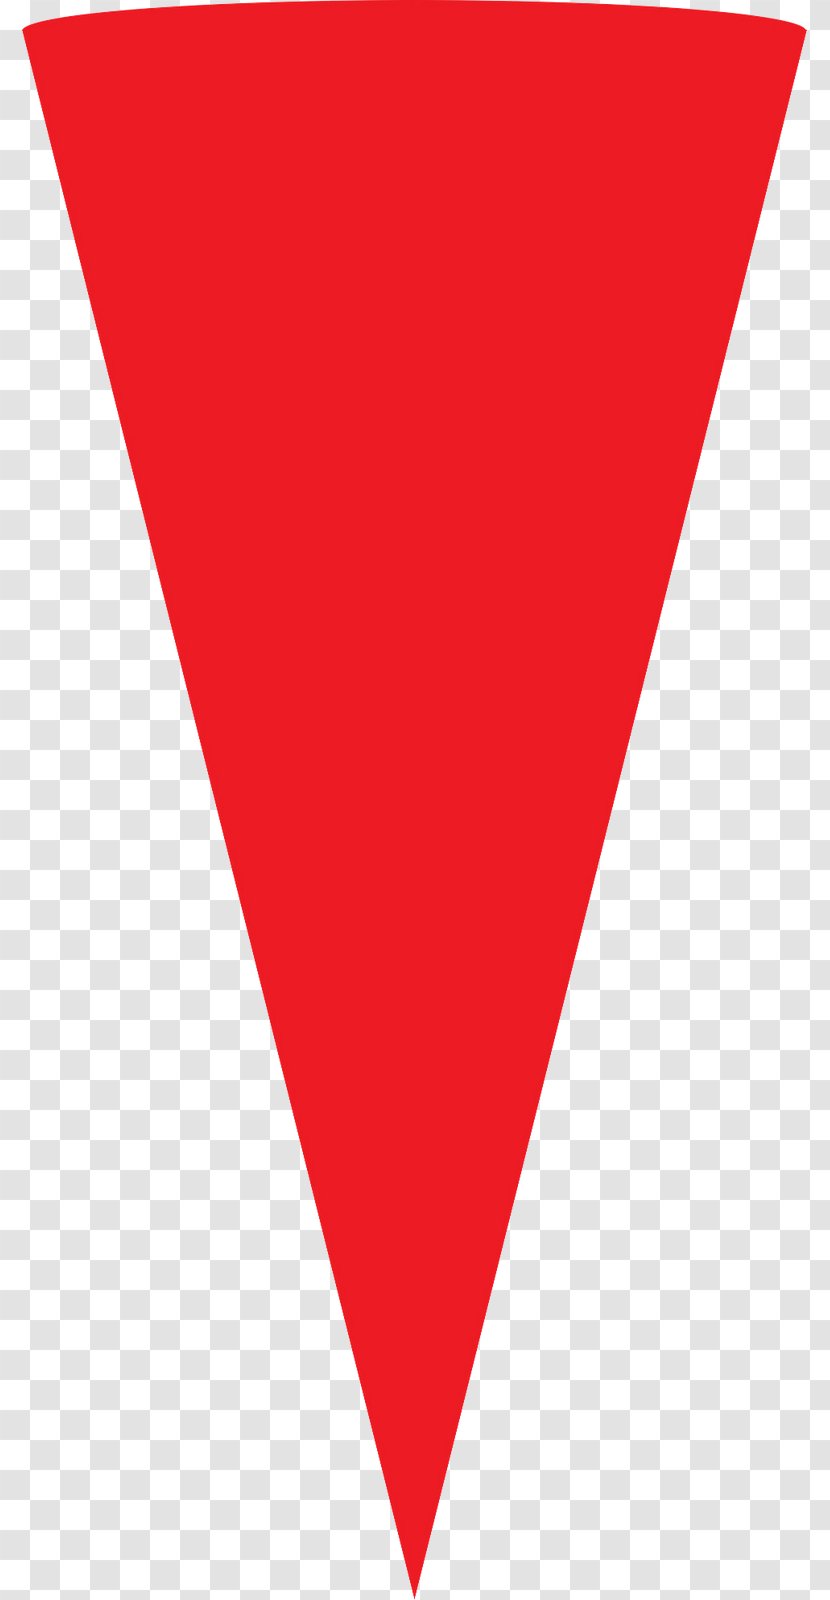 Triangle Red - Business - TRIANGLE Transparent PNG